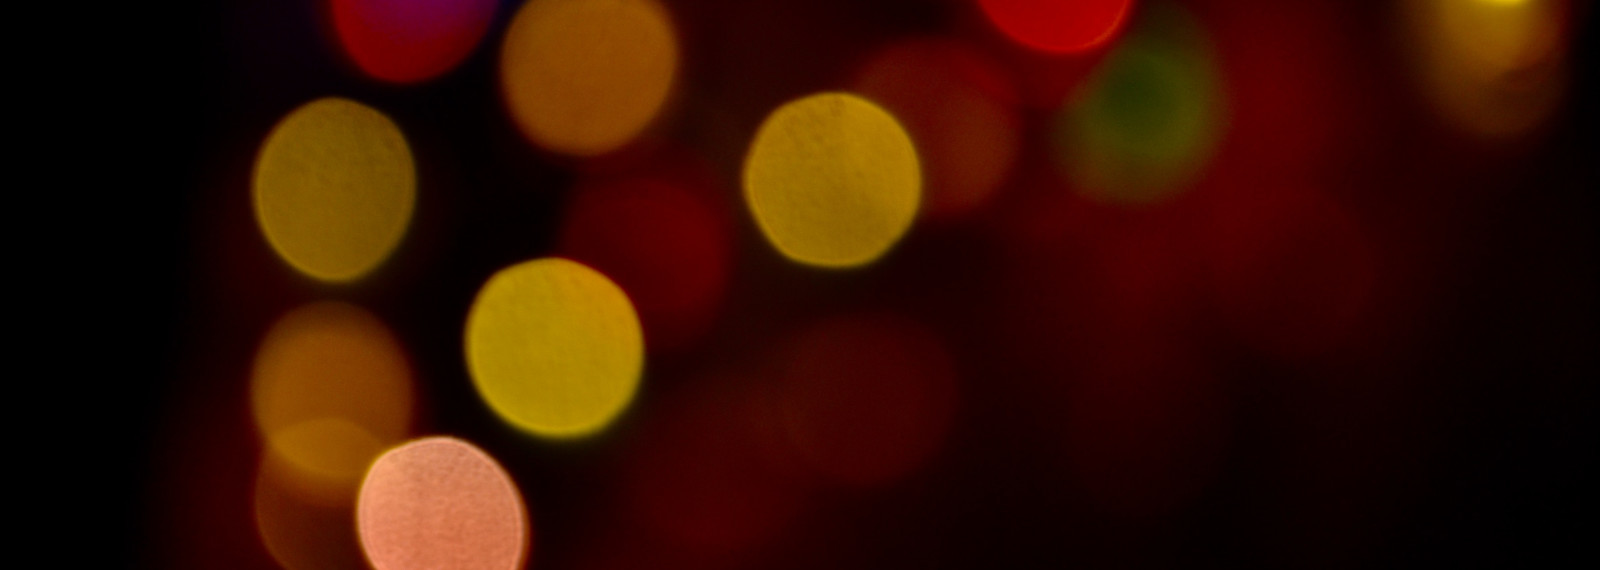 image of a close up of out of focus lights against a dark background